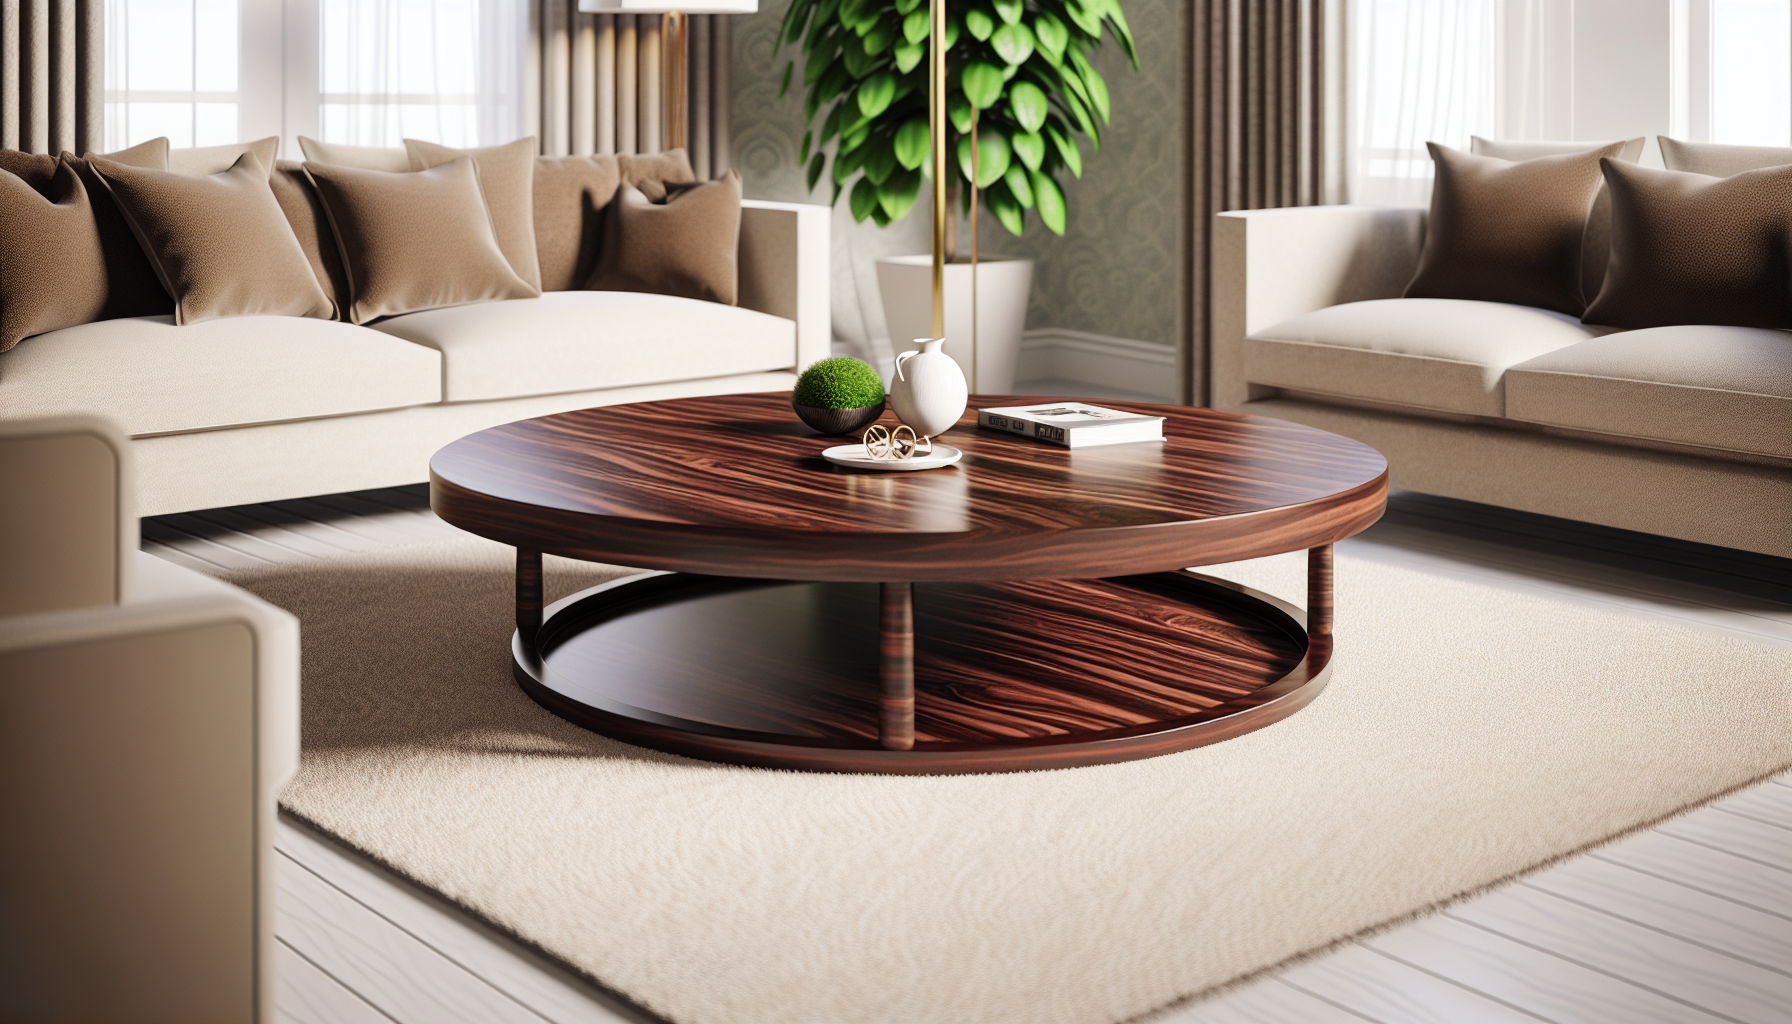 Elegant round coffee table with high-quality materials